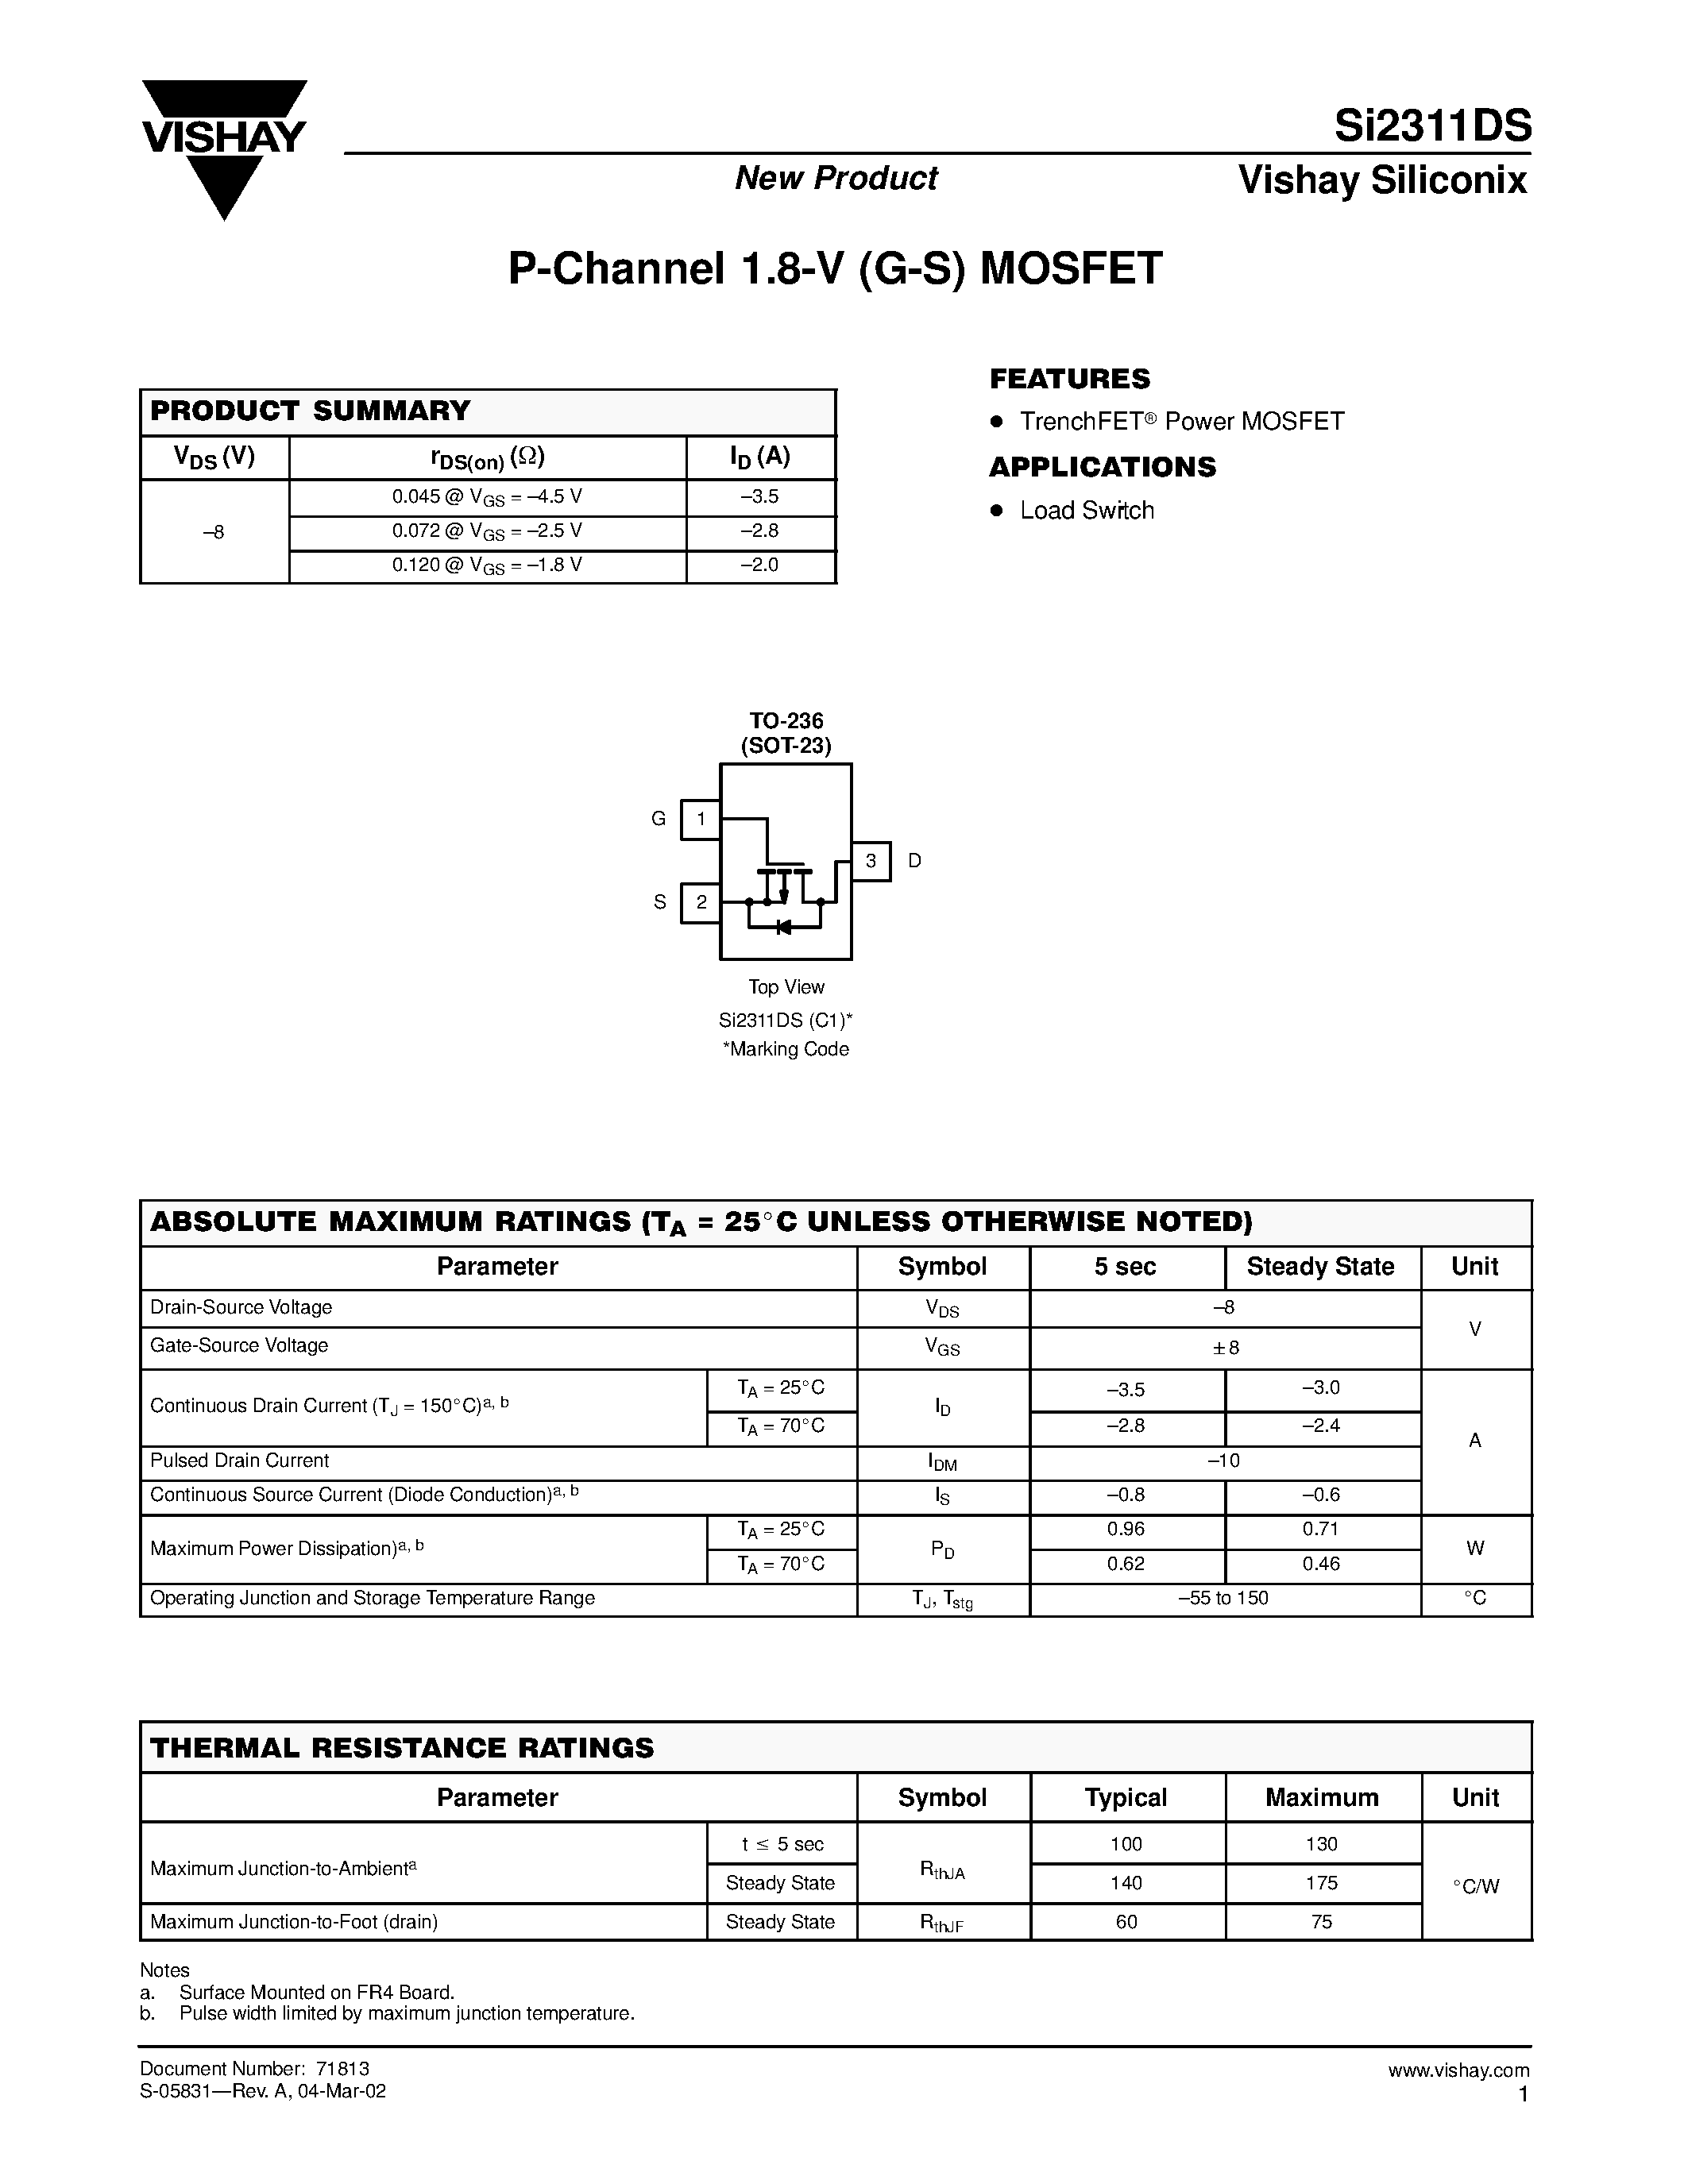 Datasheet SI2311DS - P-Channel 1.8-V (G-S) MOSFET page 1